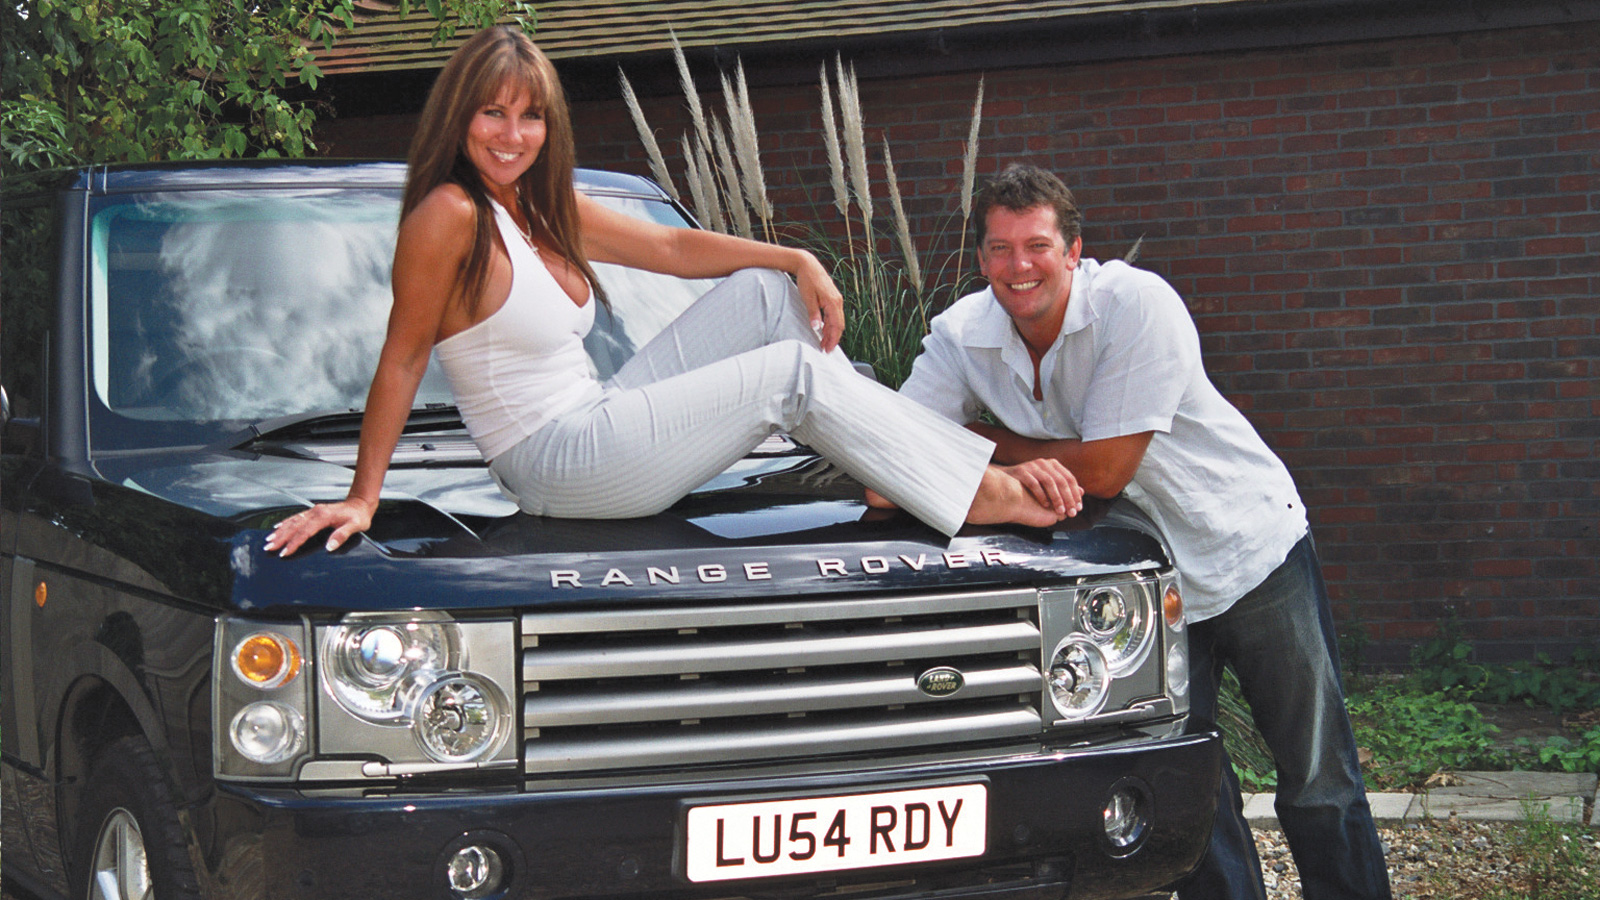 Private Number Plates of the Celebs: Linda Lusardi, page 1